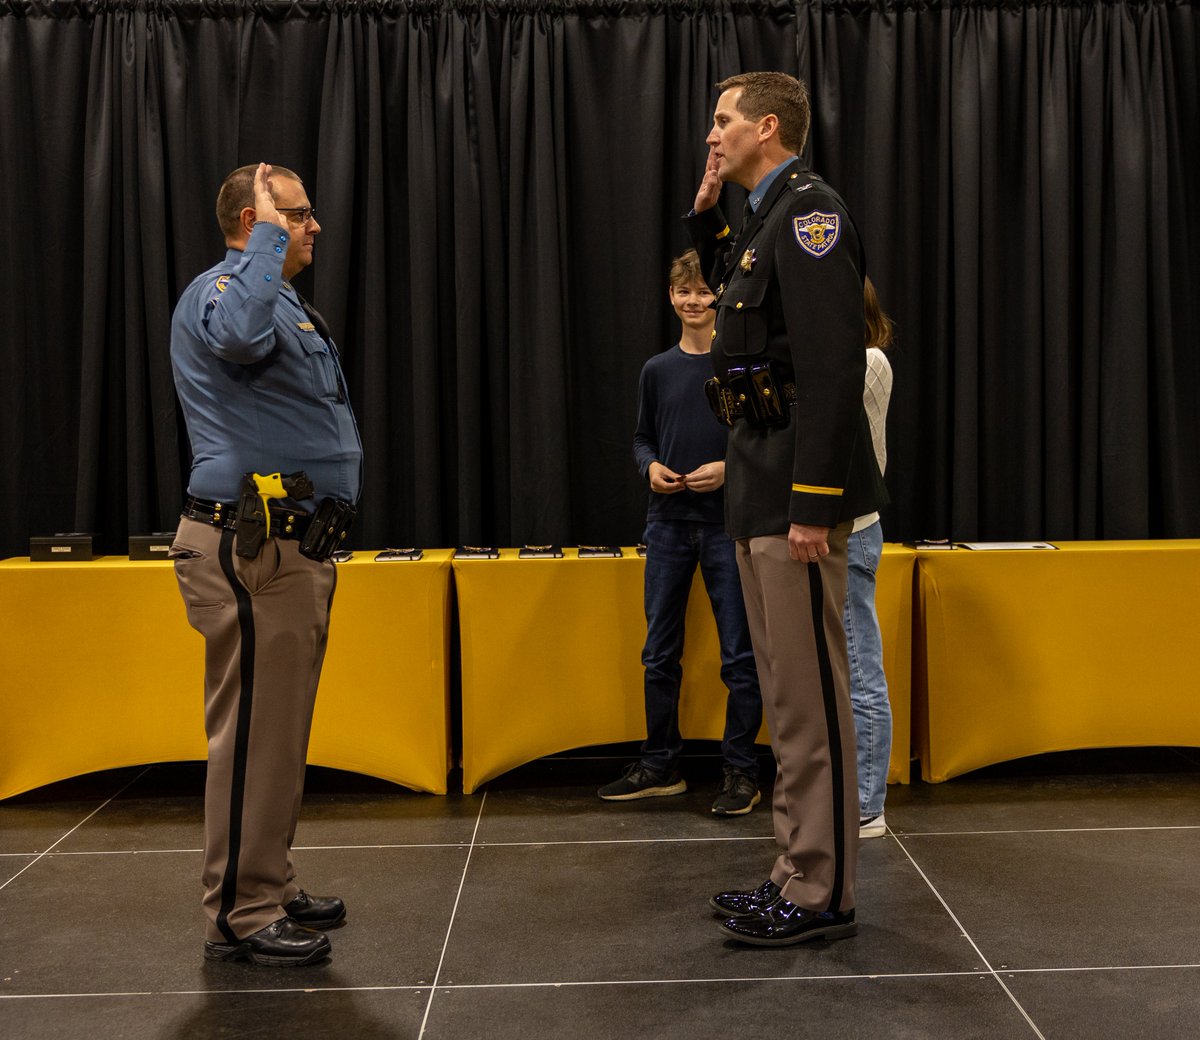 (2)Give a big hand to our seven new Sergeants! Congratulations on this new path of being supervisors and leaders within the Colorado State Patrol. May you excel in your new endeavors!